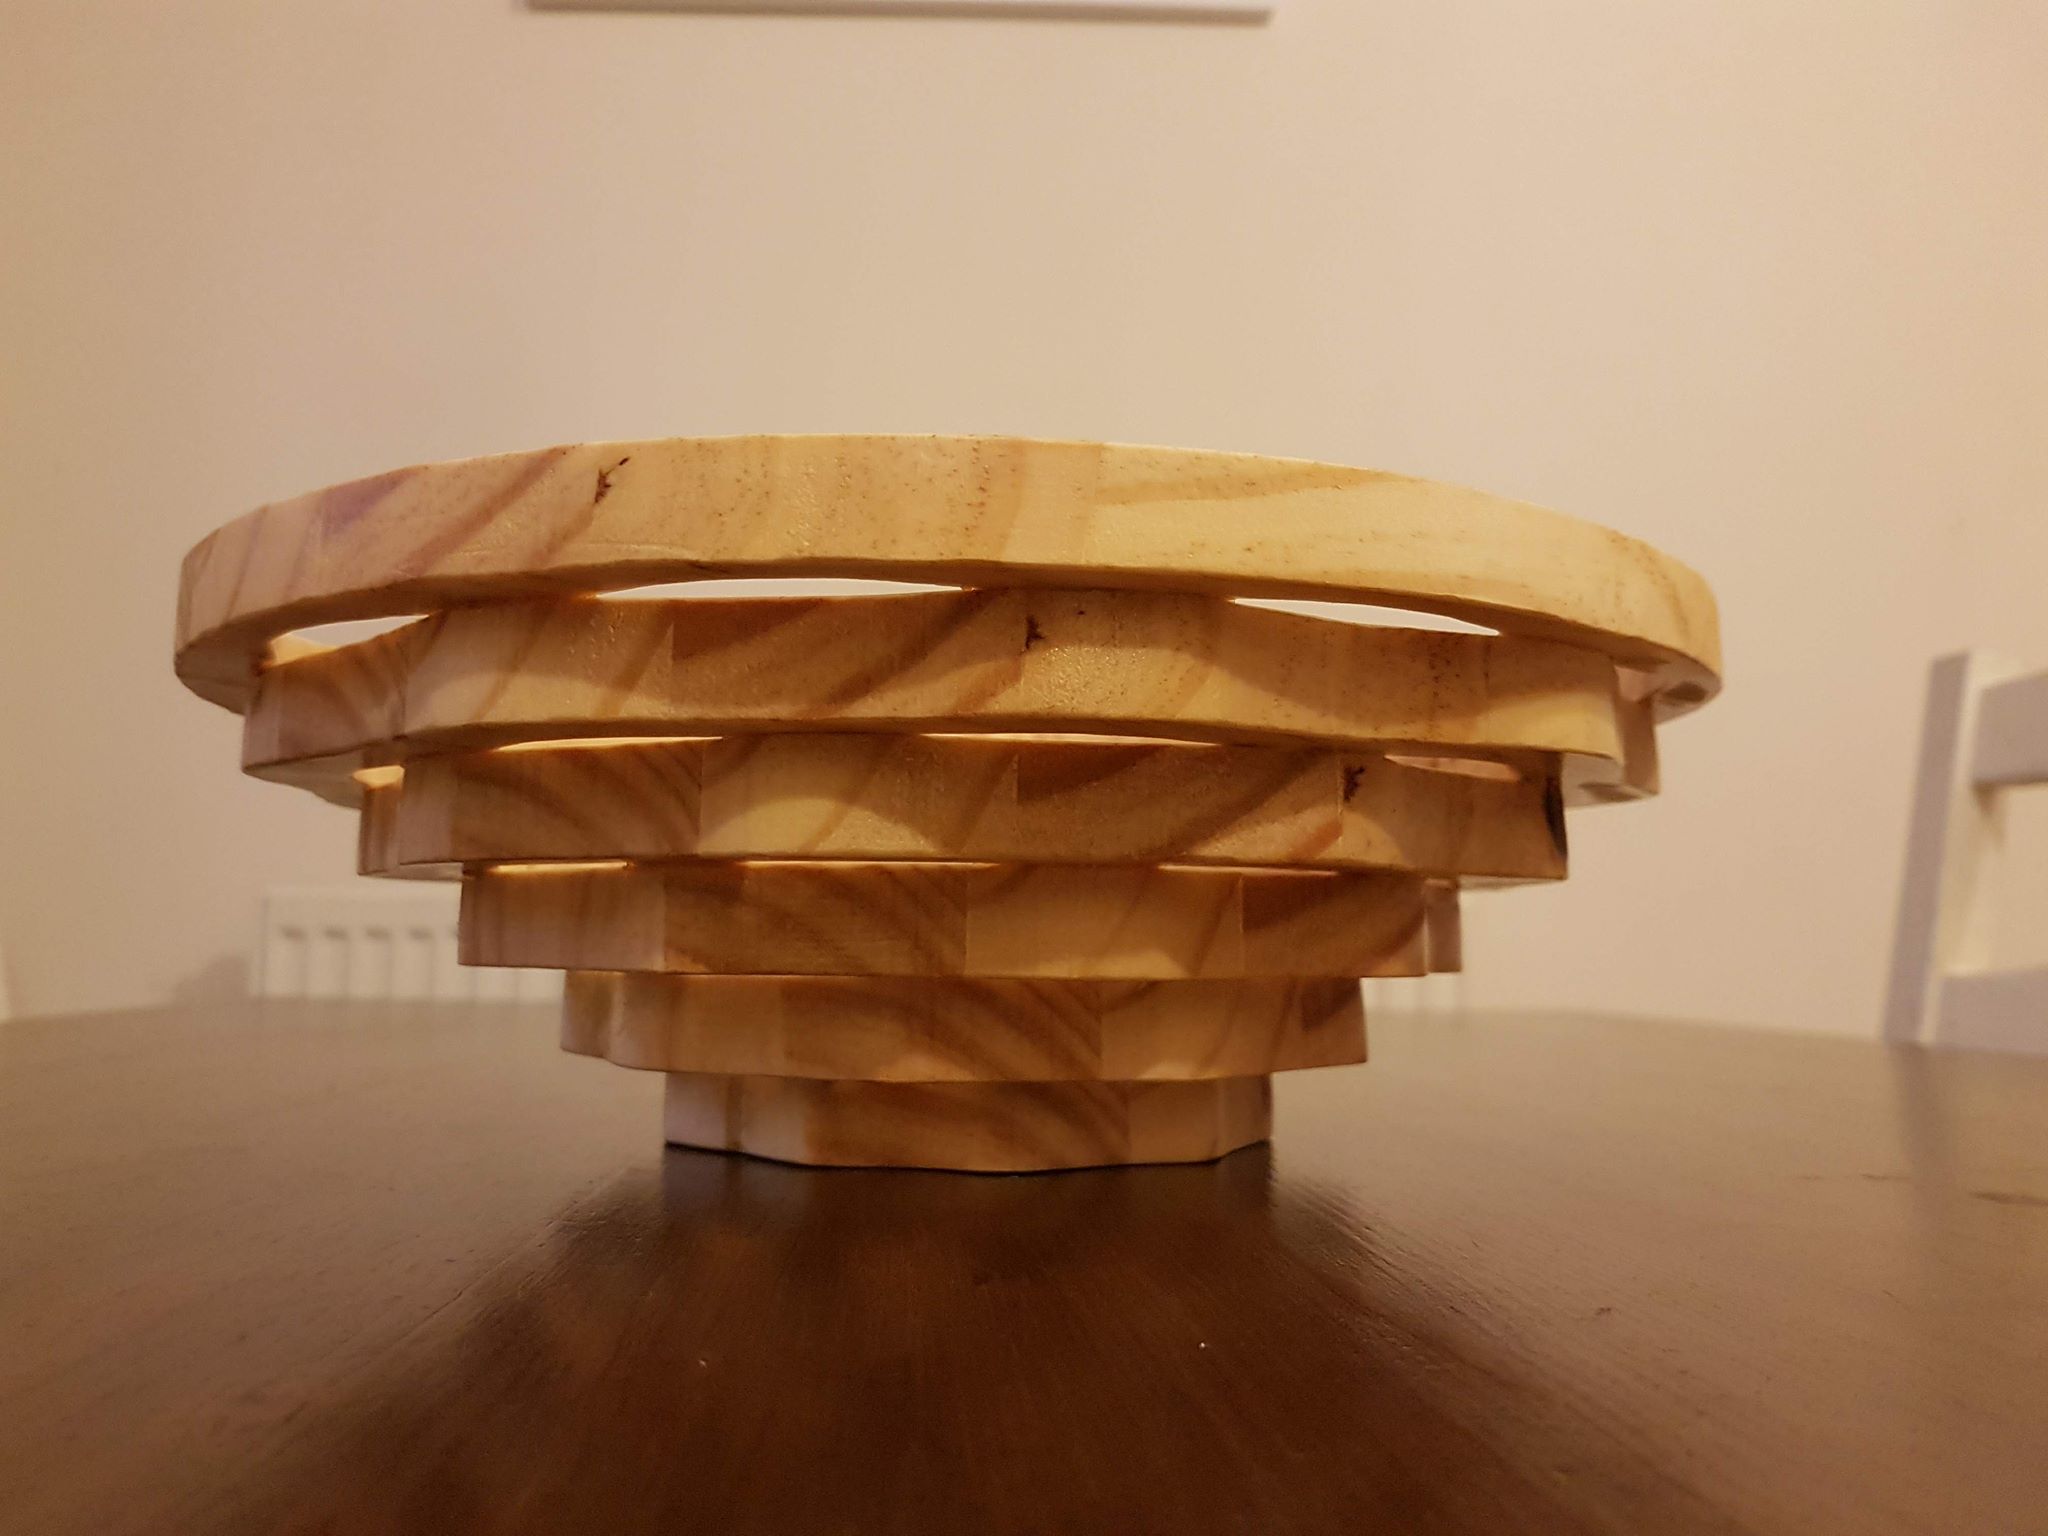 Scroll Saw Basket Bowl - Tutorial and tips